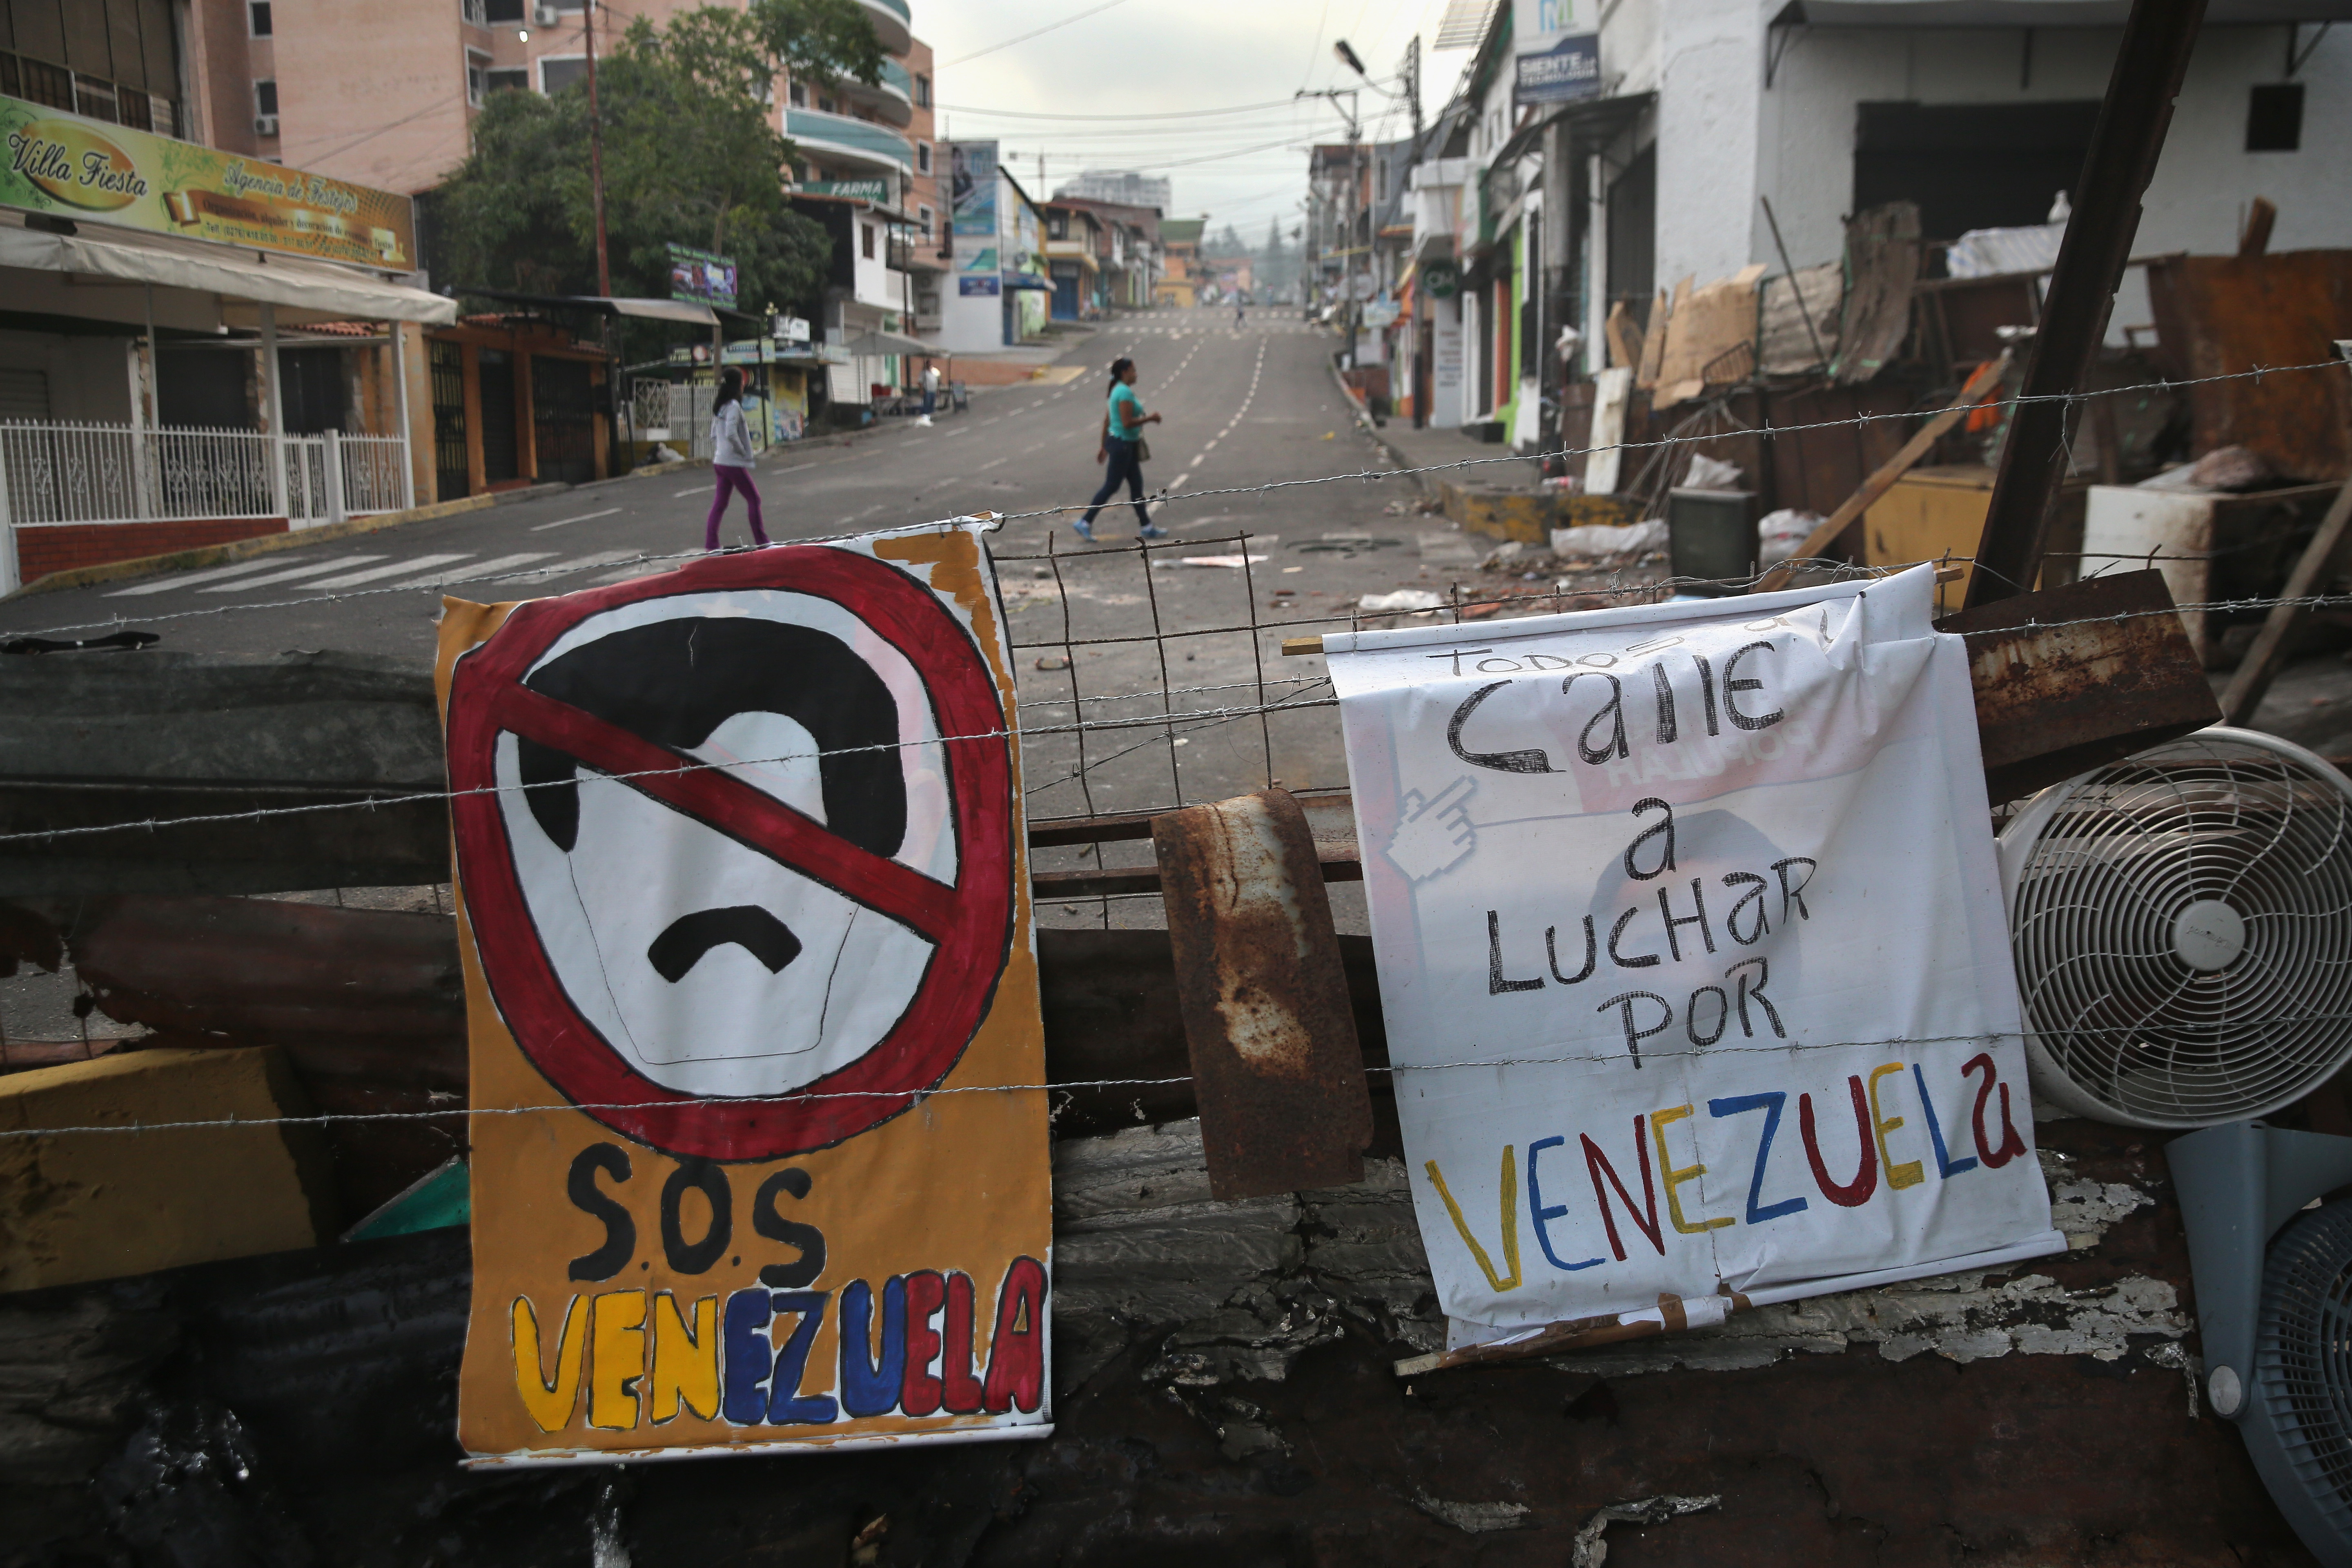 Women walk past protesters' barricades on March 8, 2014 in San Cristobal. (Photo by John Moore/Getty Images)